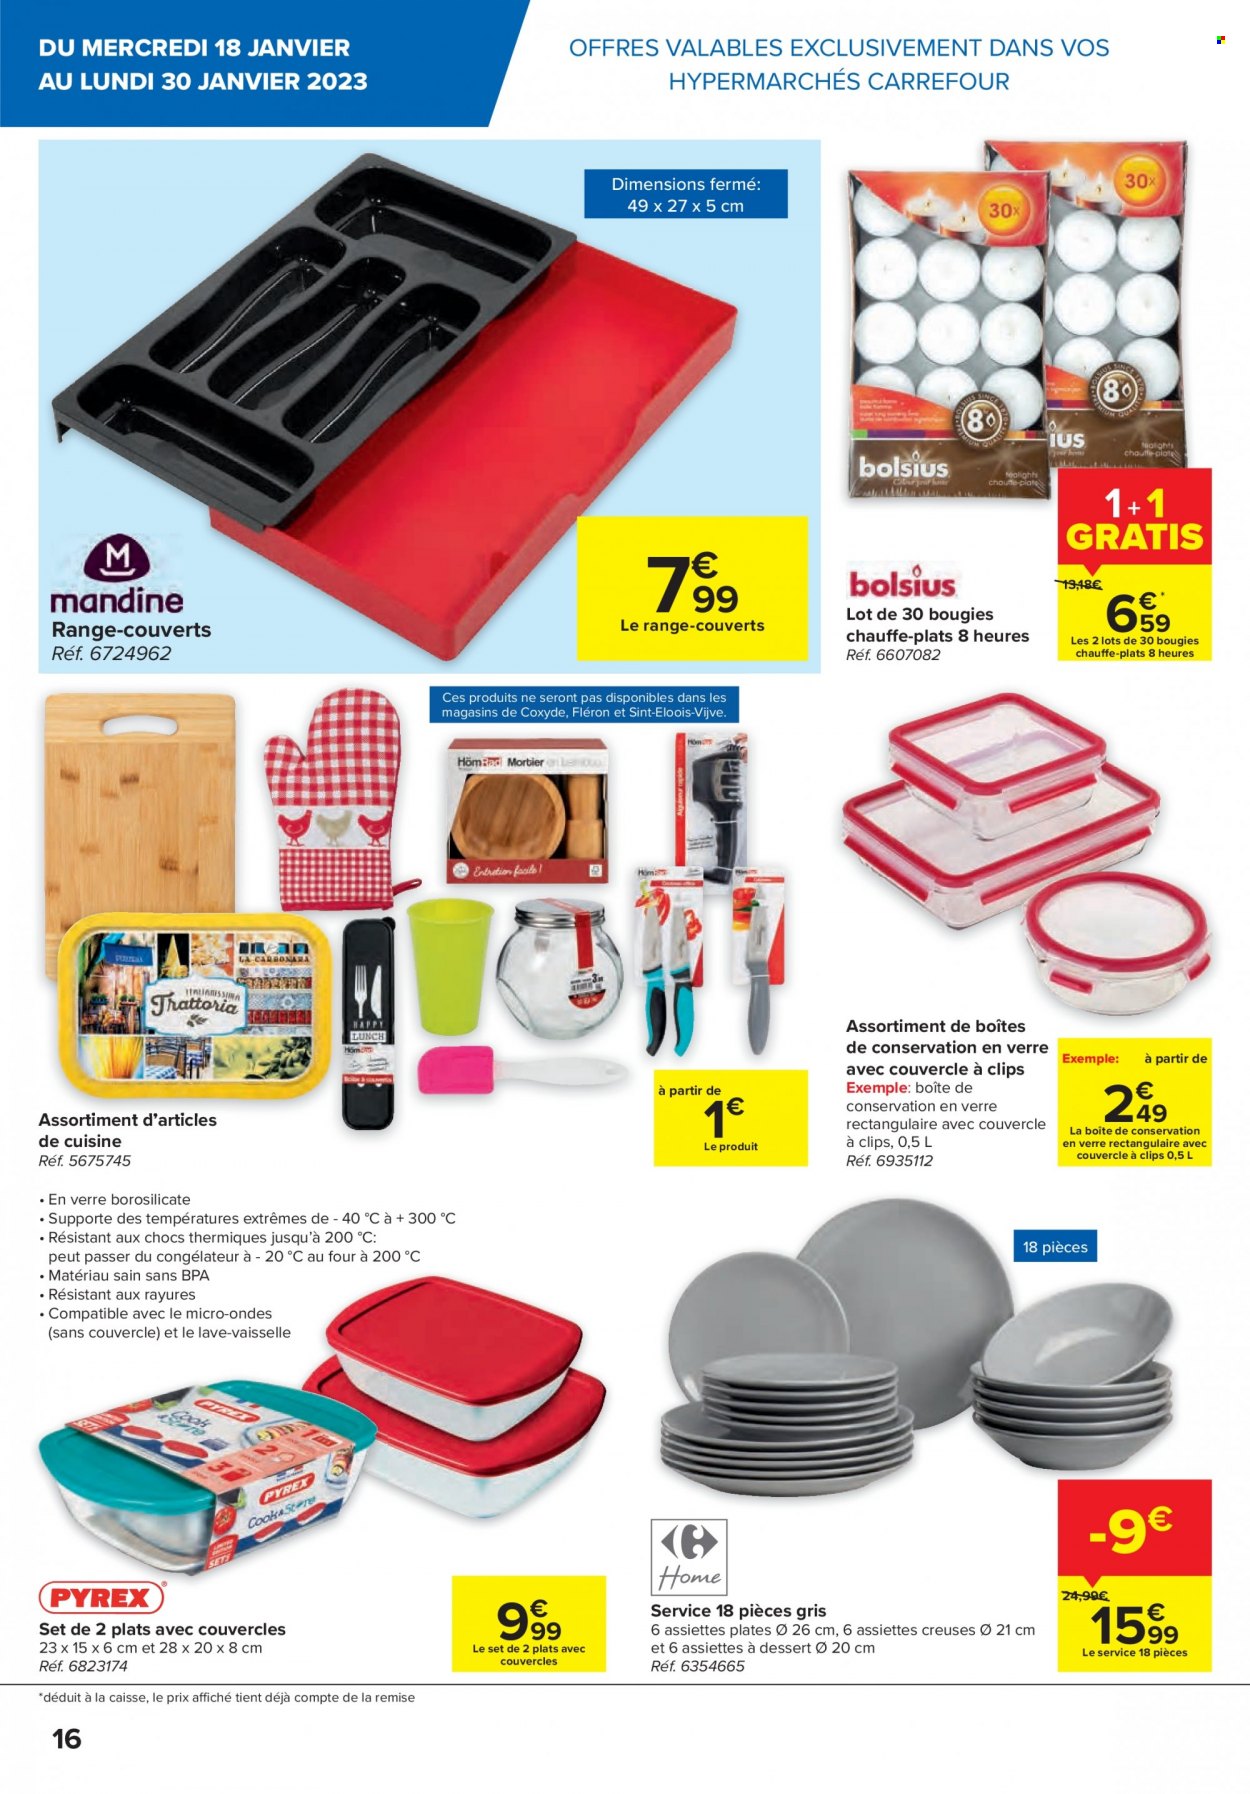 Catalogue Carrefour hypermarkt - 18.1.2023 - 30.1.2023. Page 16.